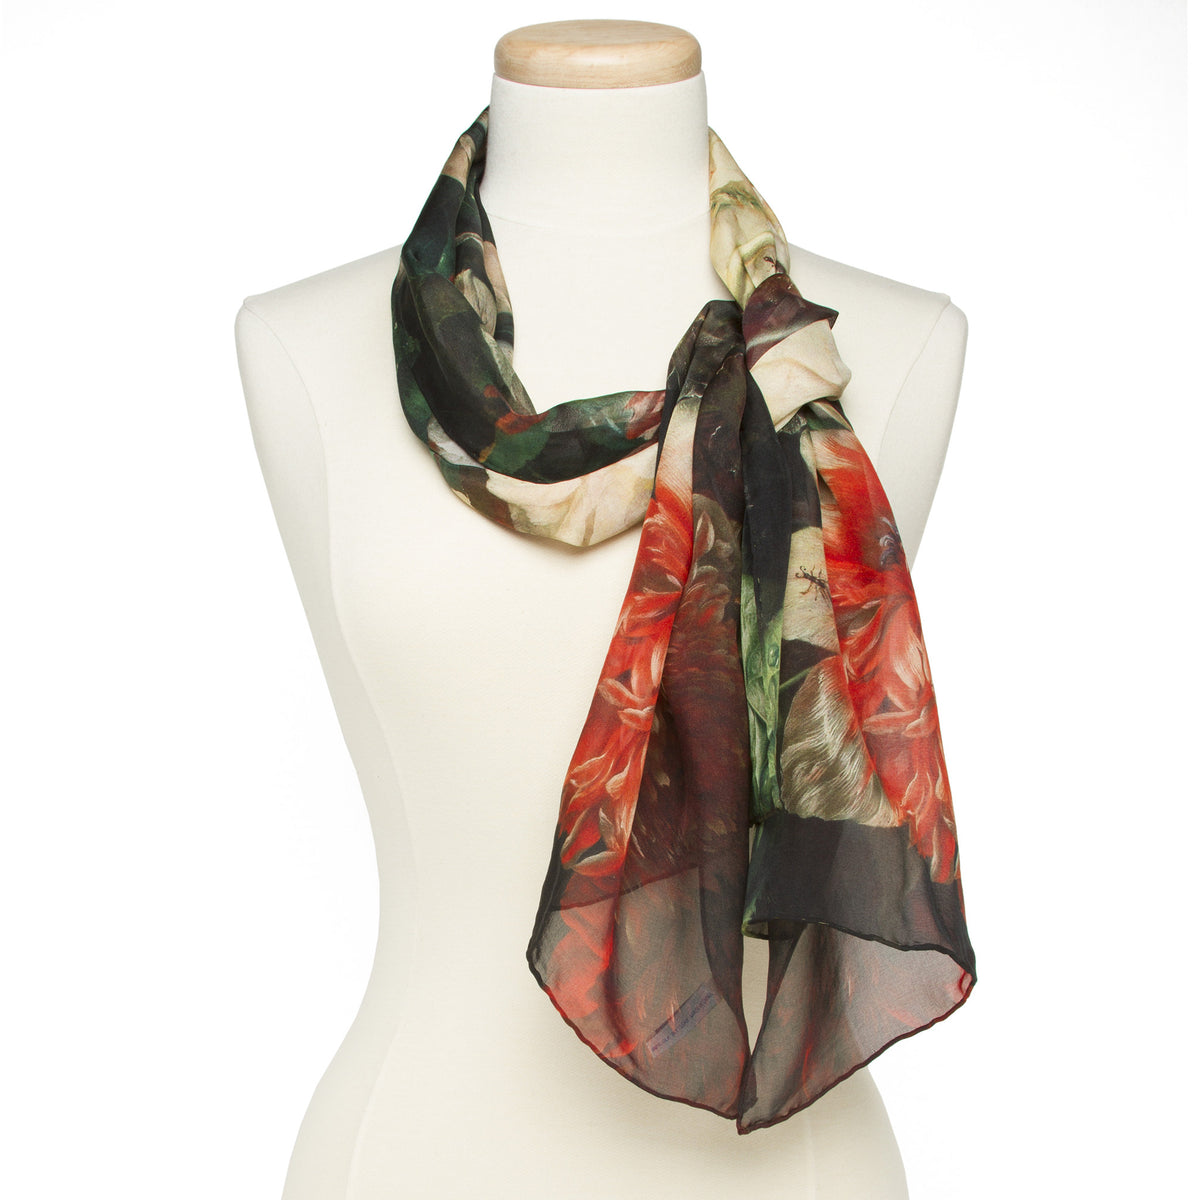 Vase of Flowers Silk Scarf shown on mannequin | Getty Store